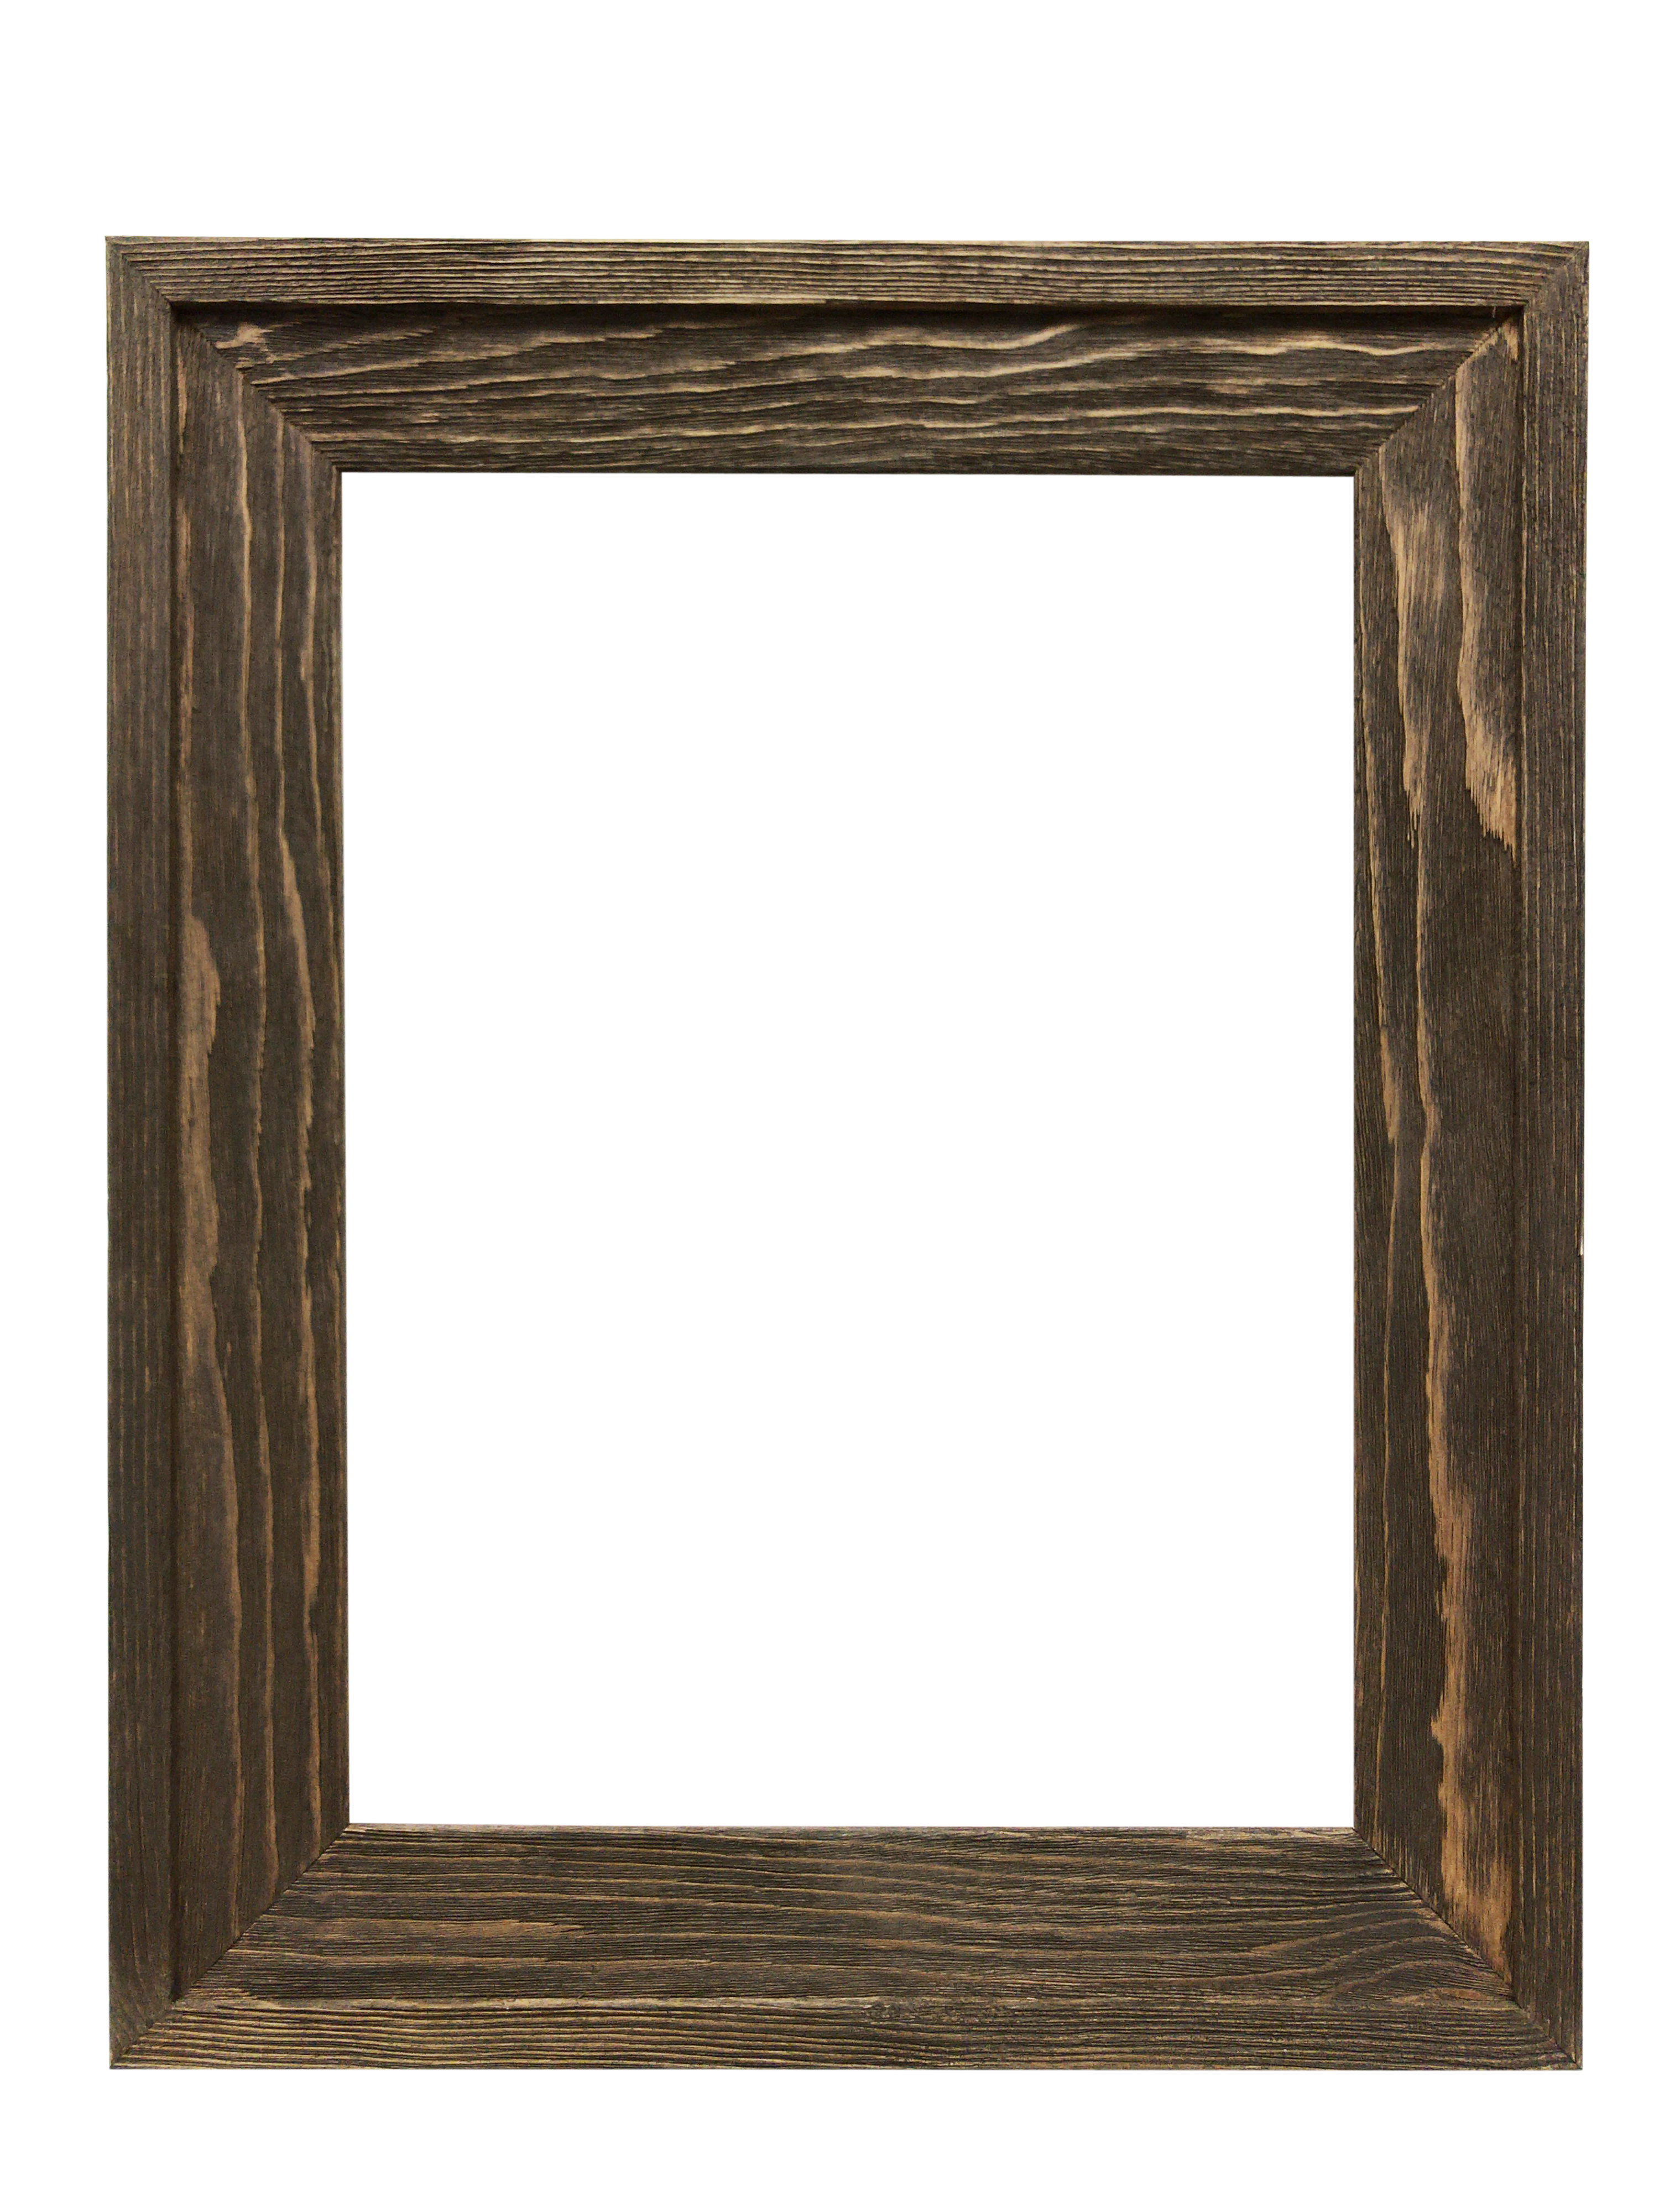 Bring the Best Wood Working: Wood Frame Painting